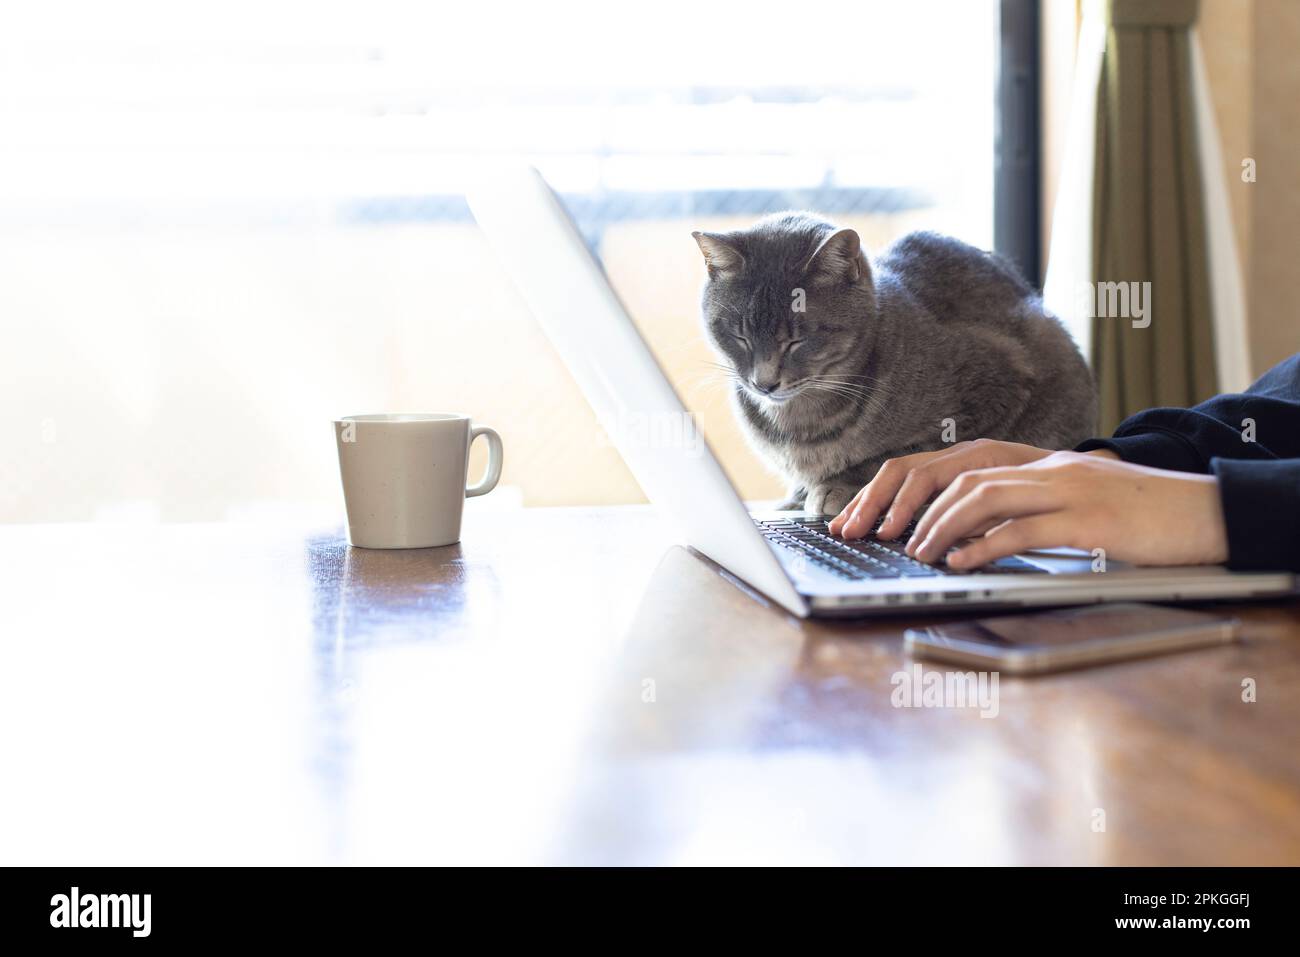 Woman's hand and cat working on laptop Stock Photo